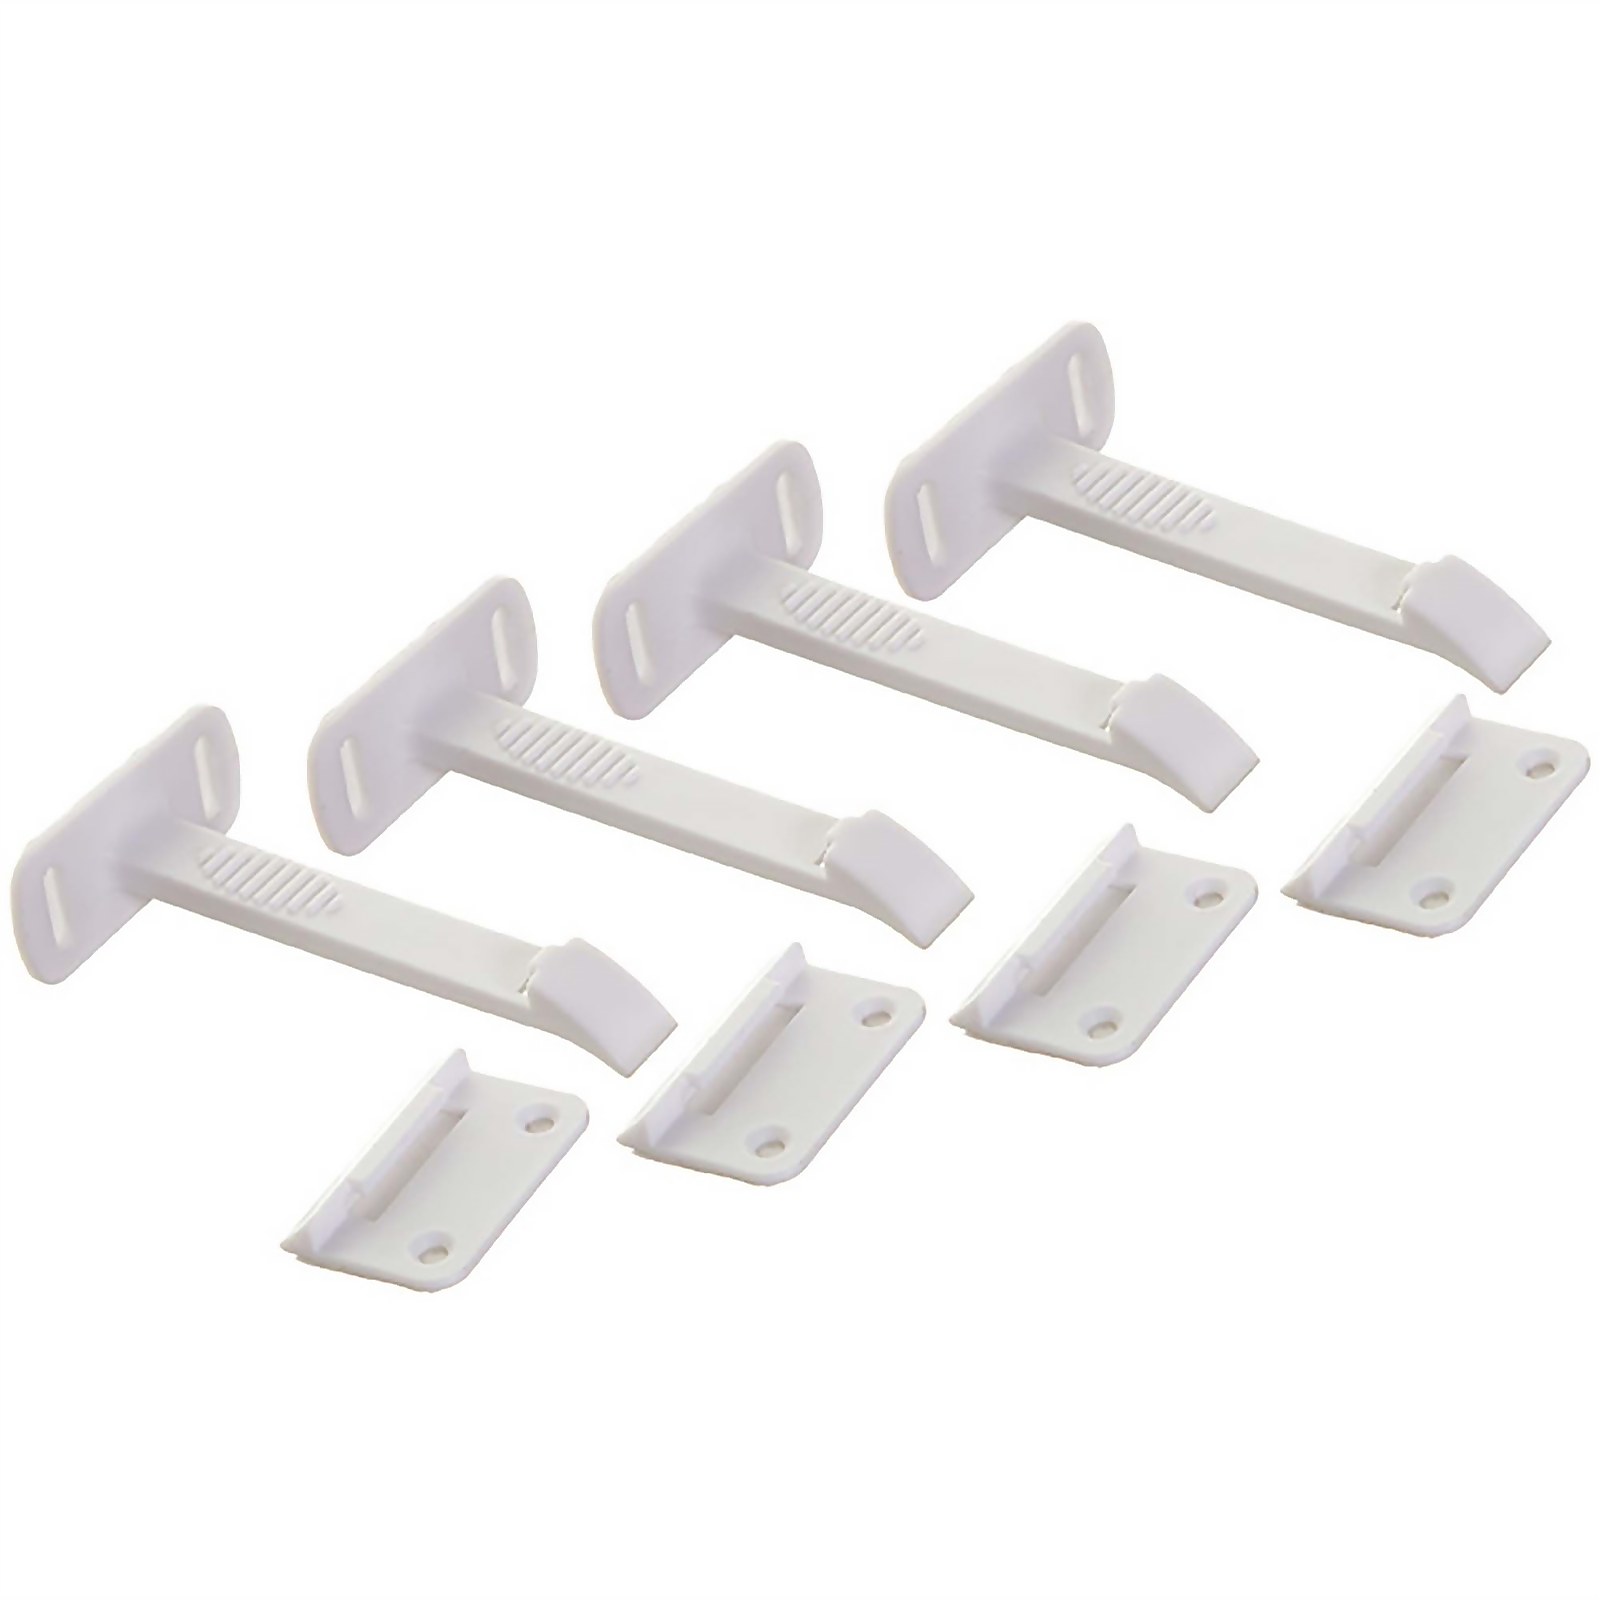 Photo of Dreambaby Long Adhesive Safety Latches - 4 Pack